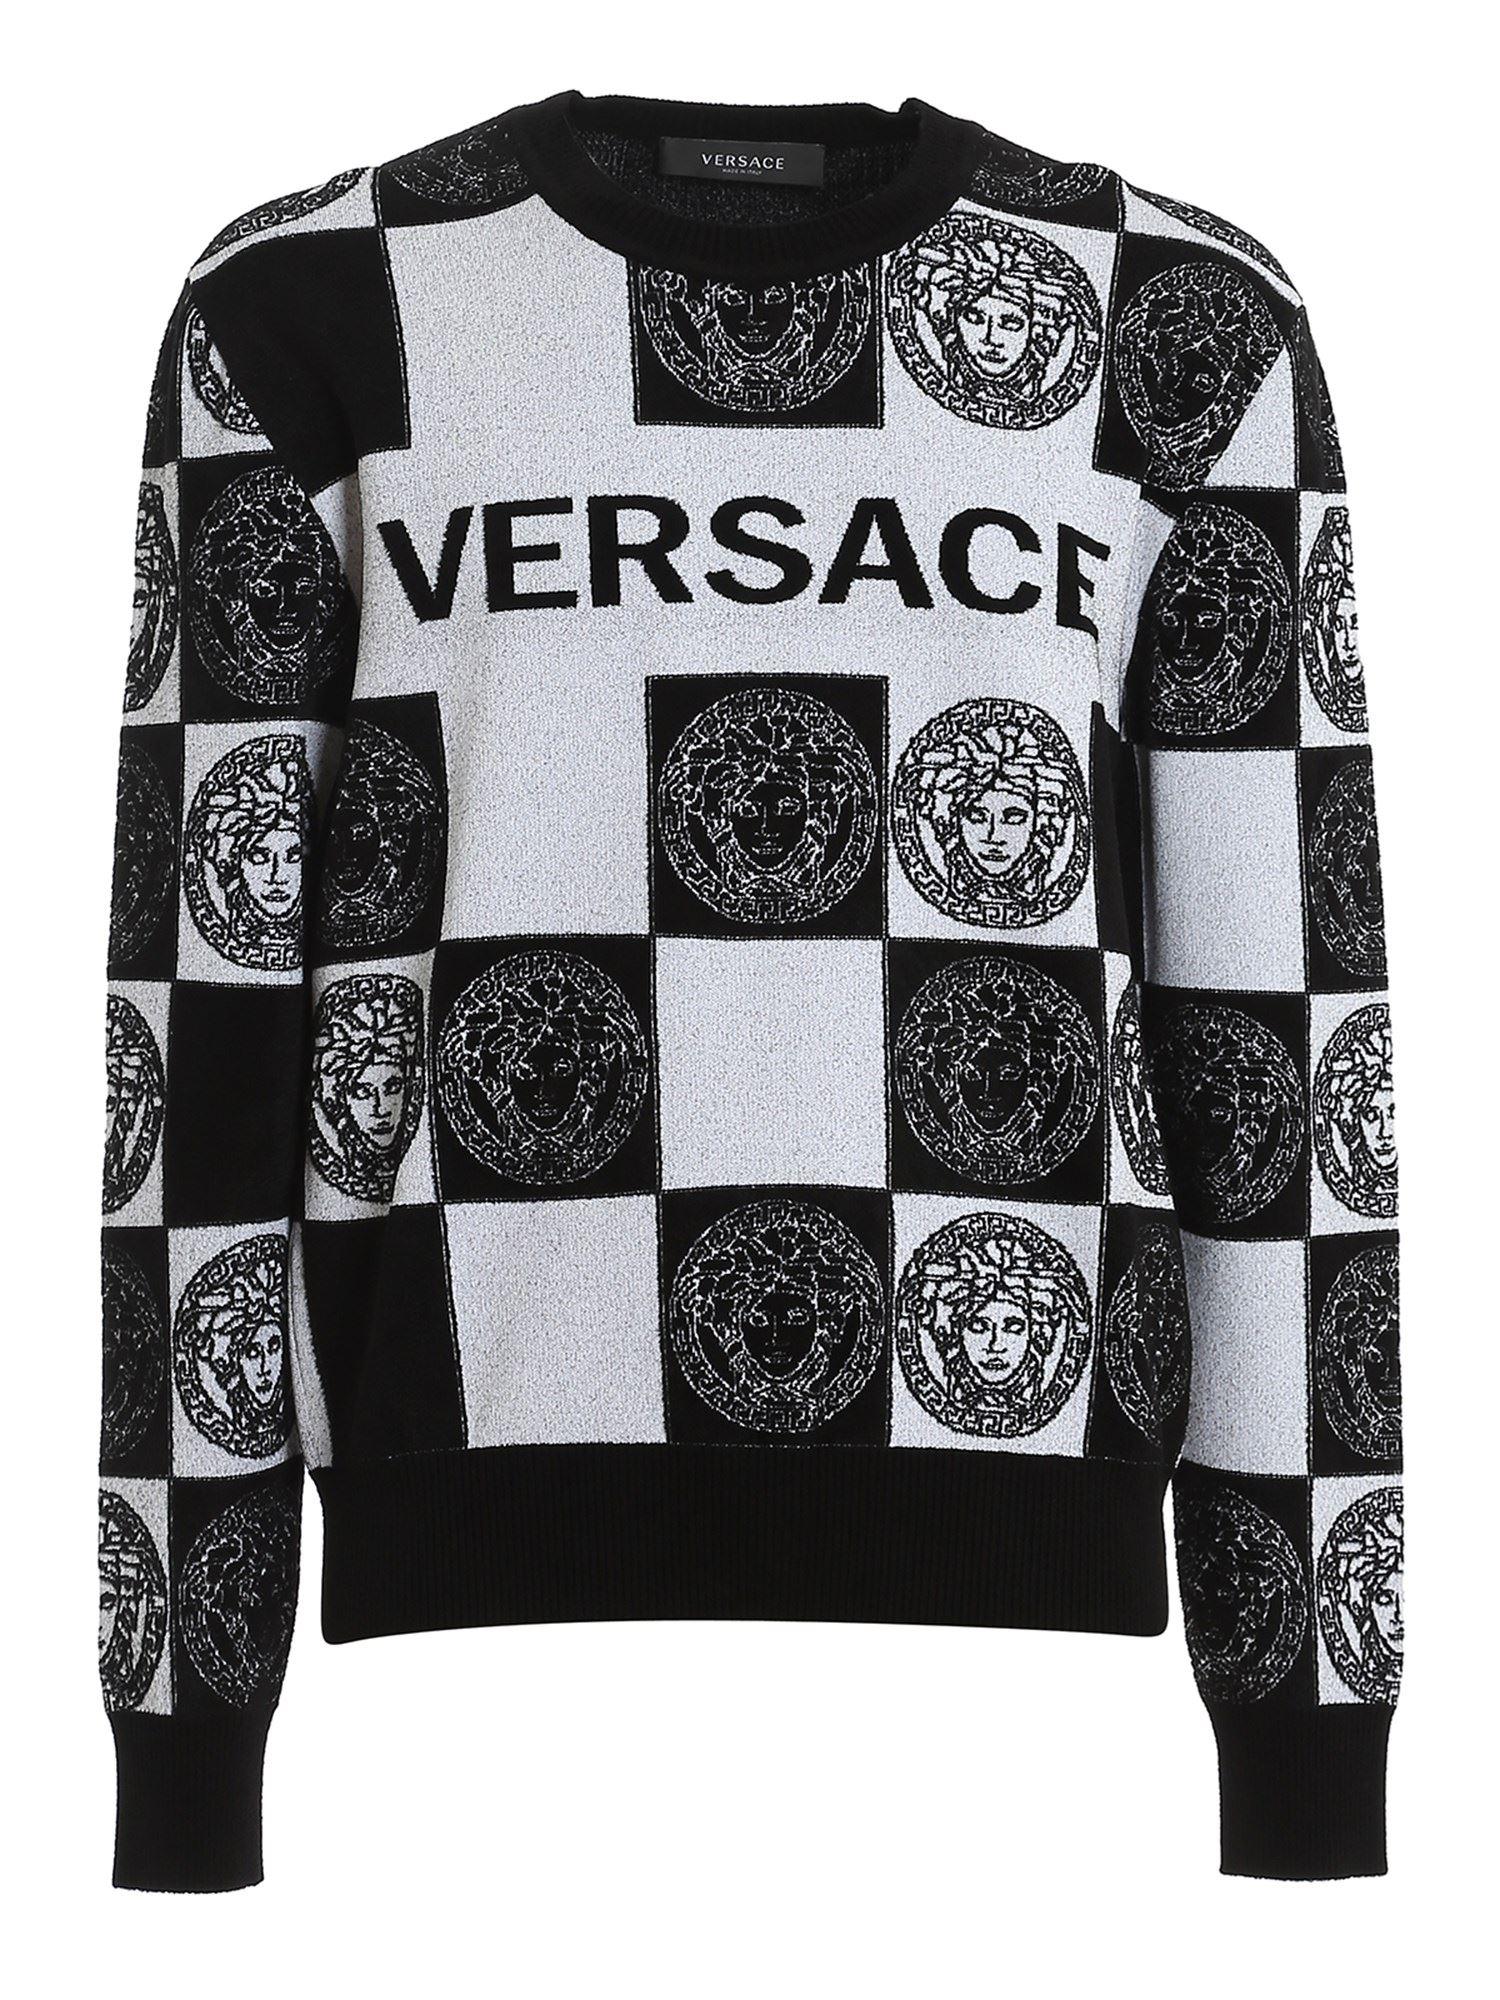 Versace All-over Logo Wool Blend Sweater in Black for Men - Lyst